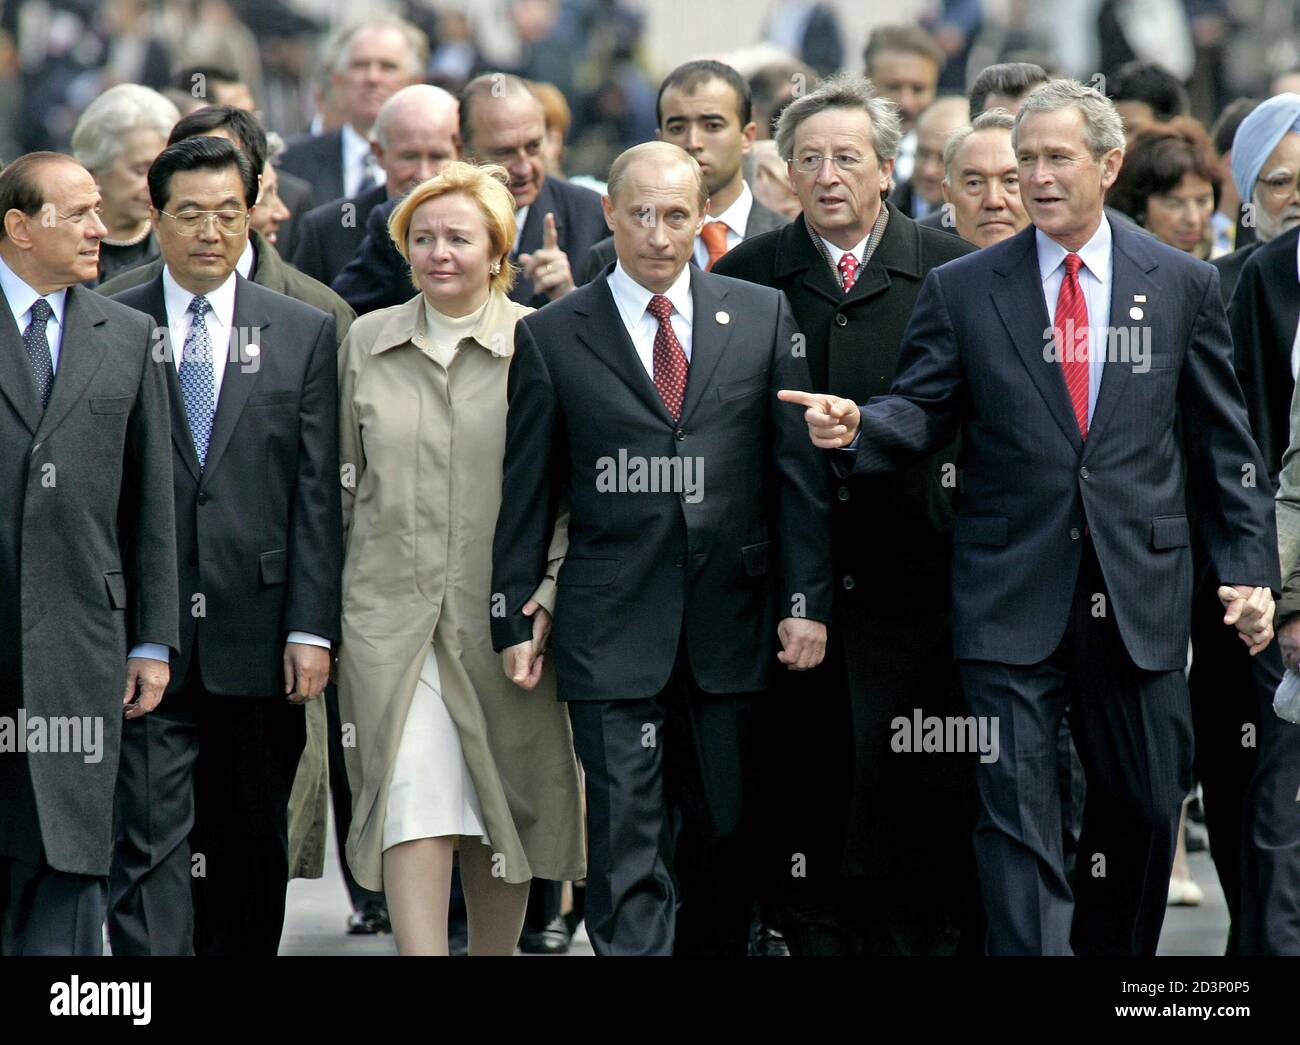 (L to R) Italy's Prime Minister Silvio Berlusconi, Chinese President Hu Jintao, Lyudmila Putin and her husband Russian President Vladimir Putin, European Union President Jean Claude Juncker and U.S. President George W. Bush walk together at the Kremlin in Moscow after attending World War Two commemoration ceremonies in Red Square May 9, 2005. Russia marked World War Two victory with an outpouring of patriotic pride for its huge wartime role and military parades that ignored tensions in relations with its neighbours. Stock Photo